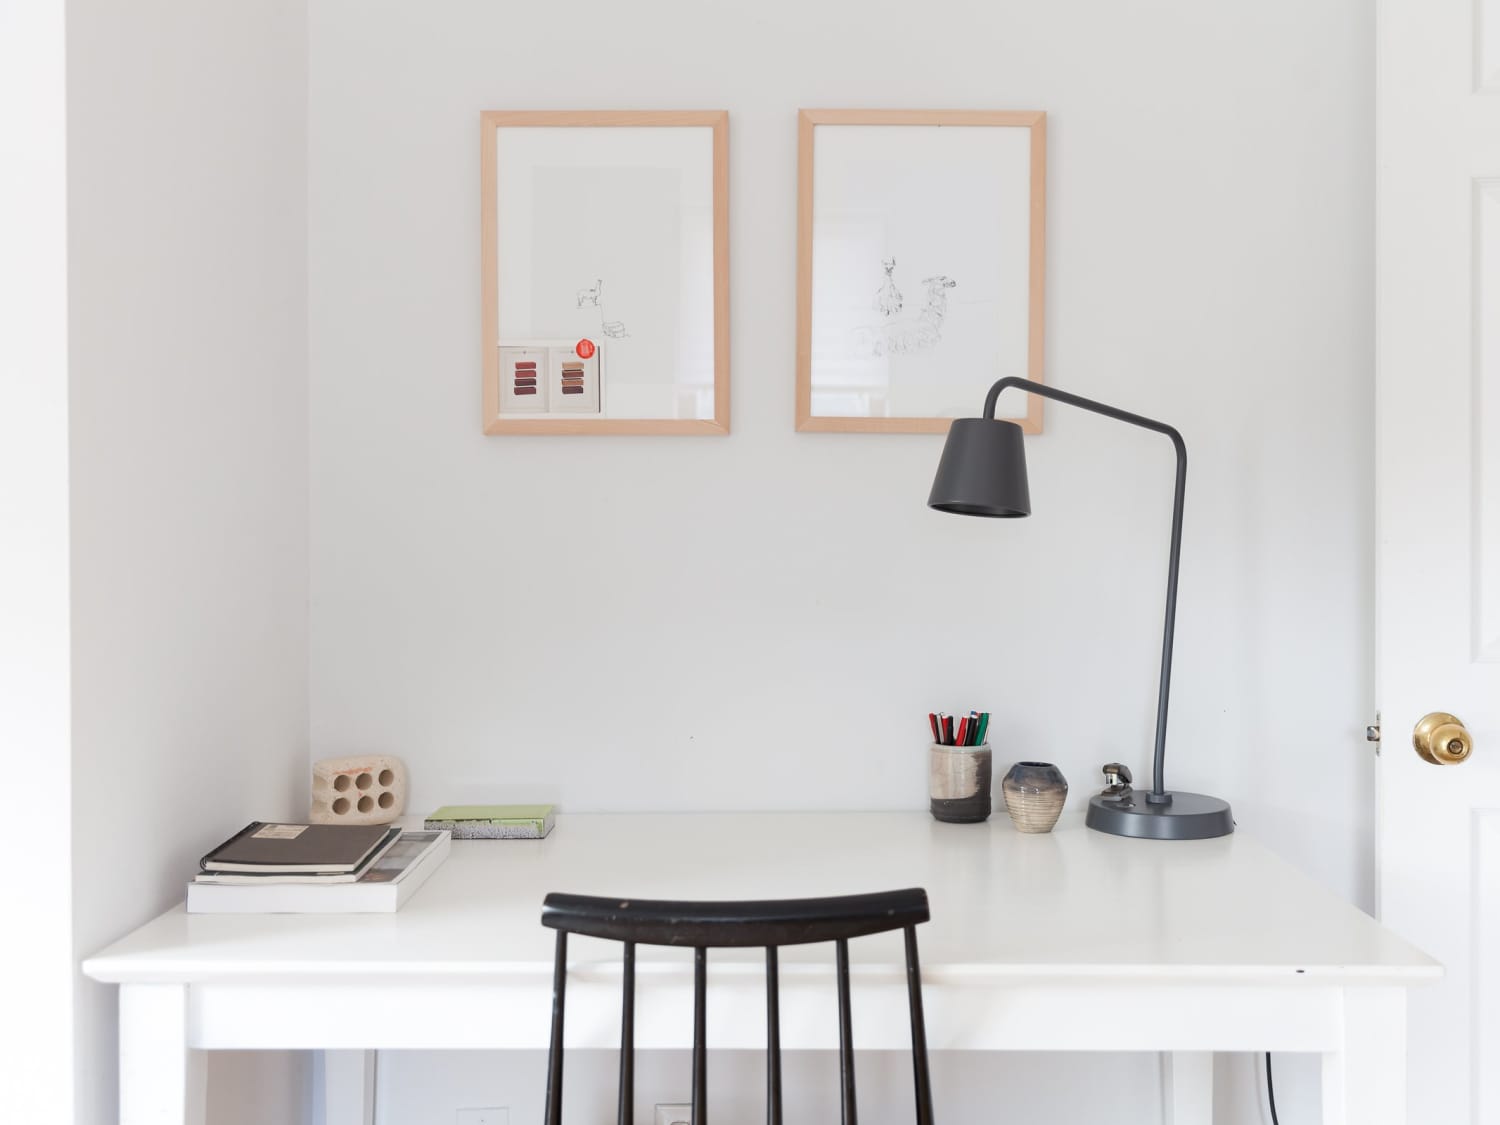 10 of Our Favorite Small Space Desks